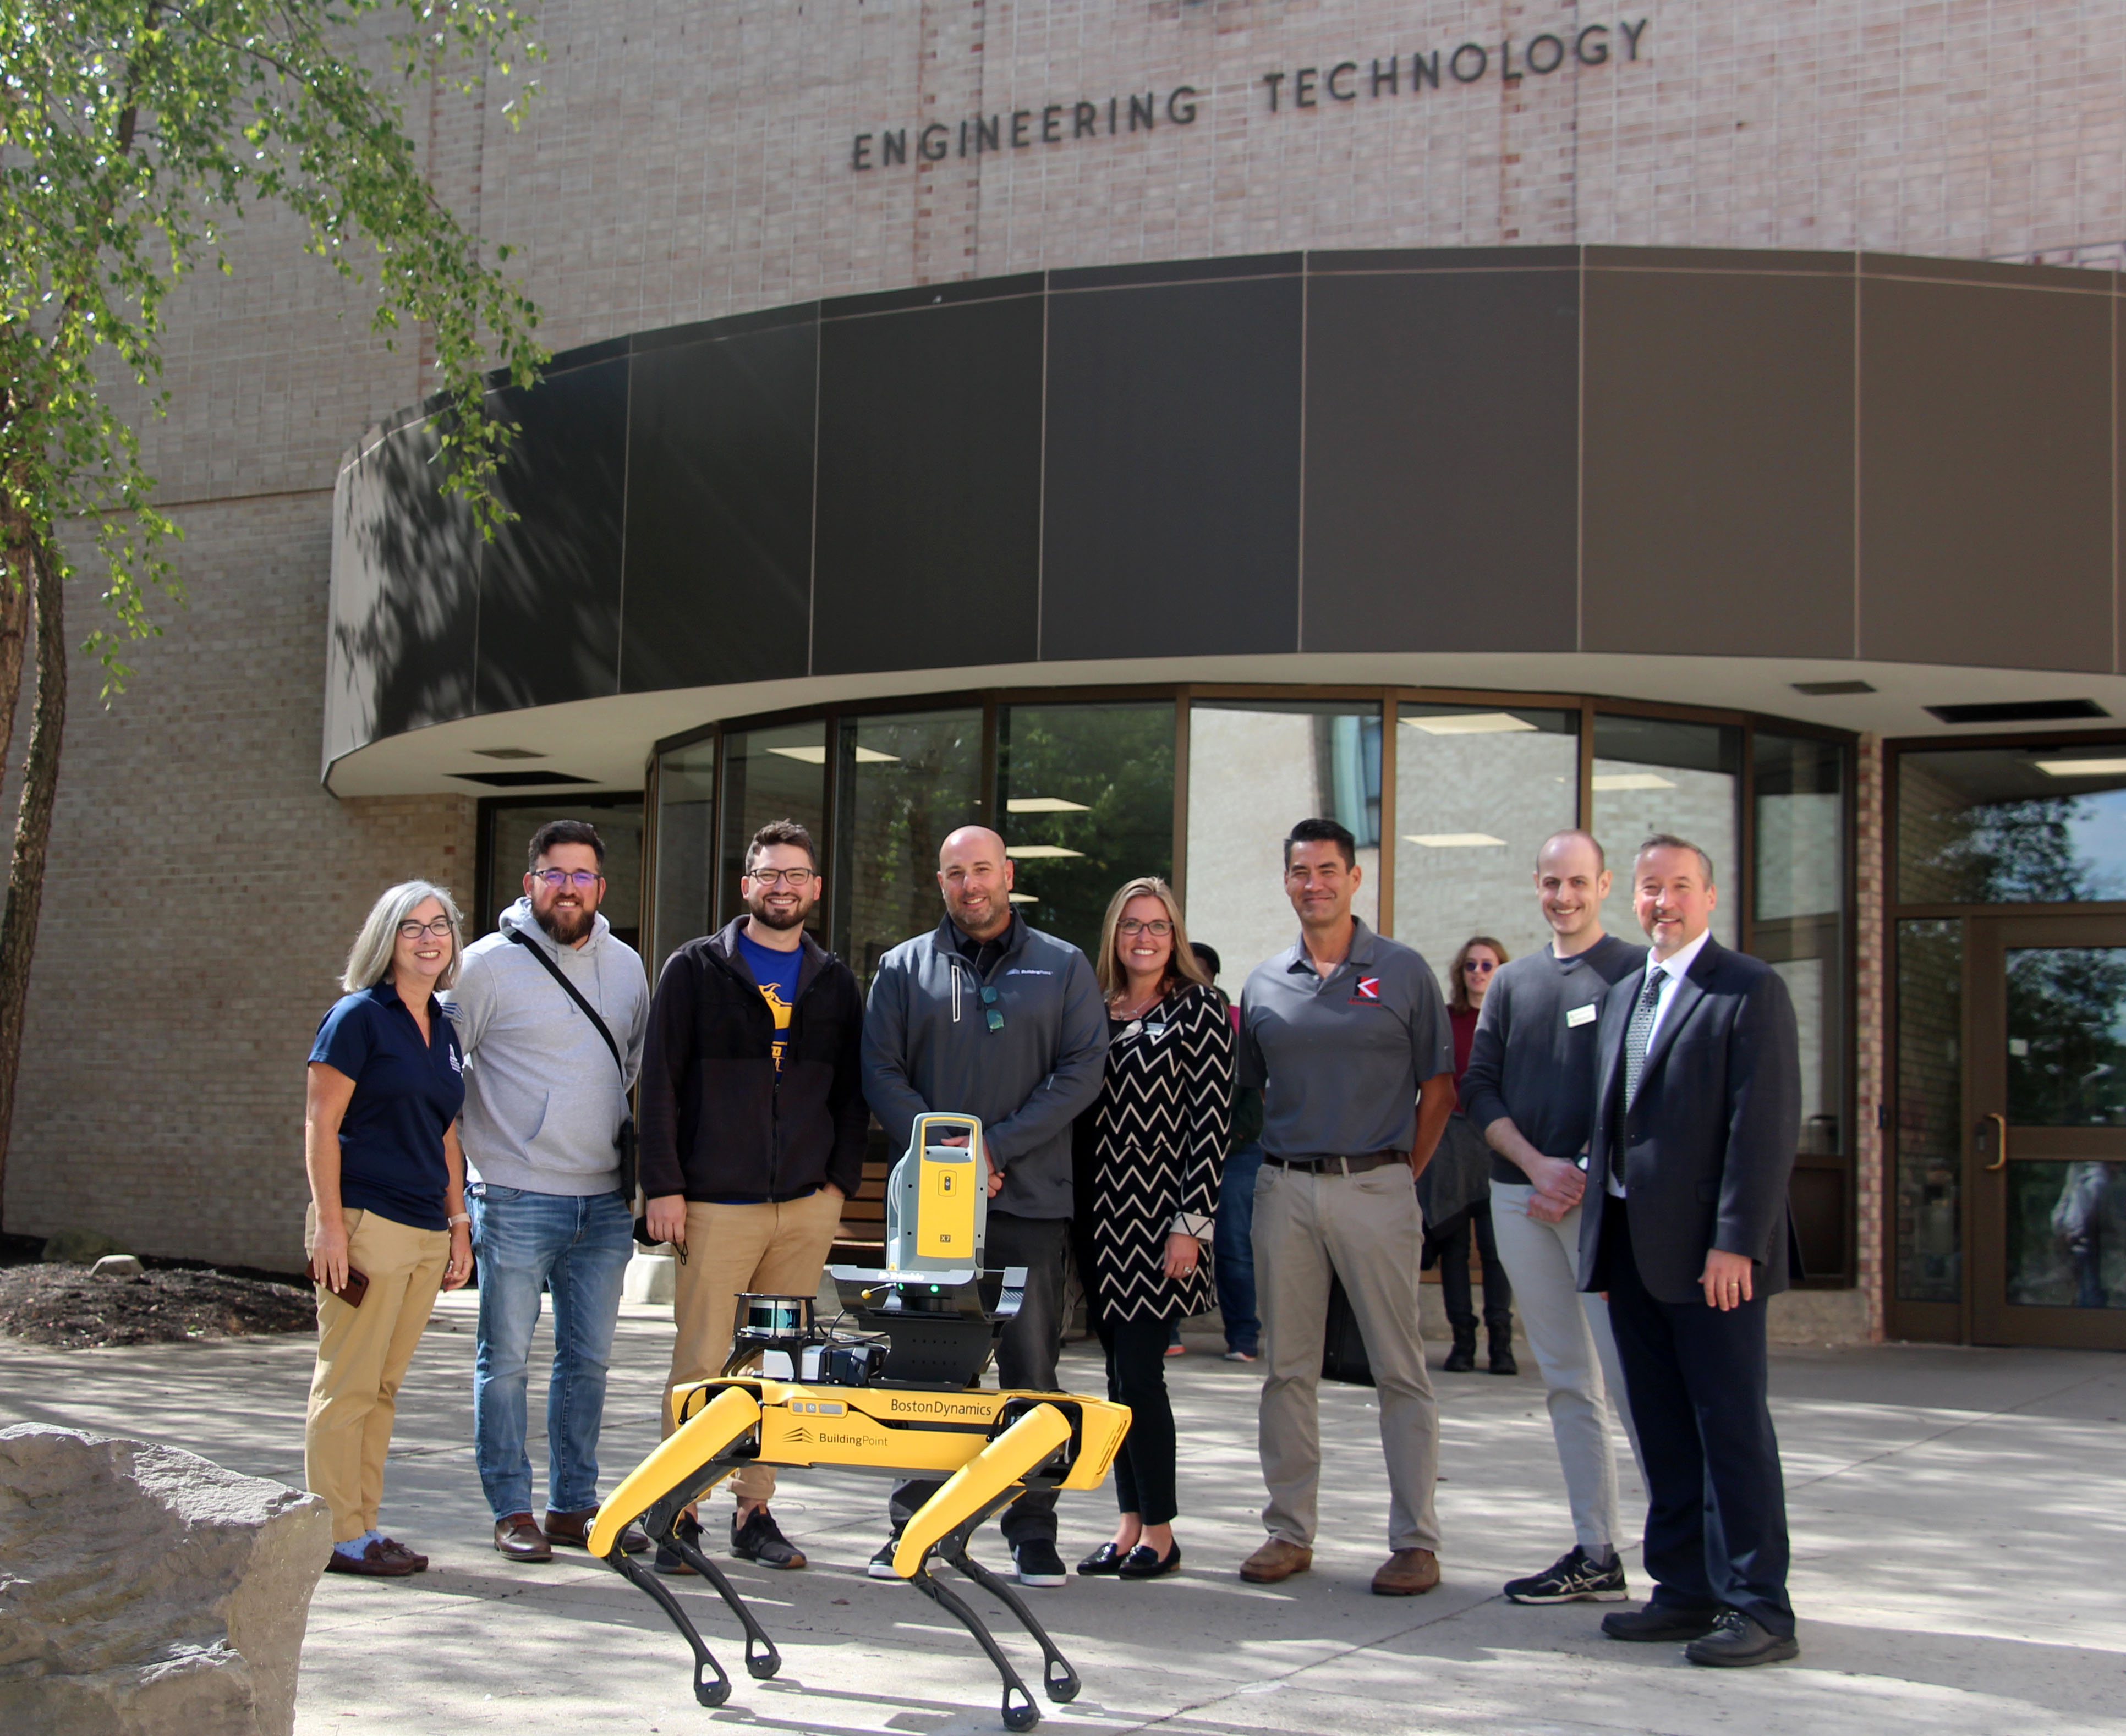 Group of individuals standing in front of building behind Spot the robot dog